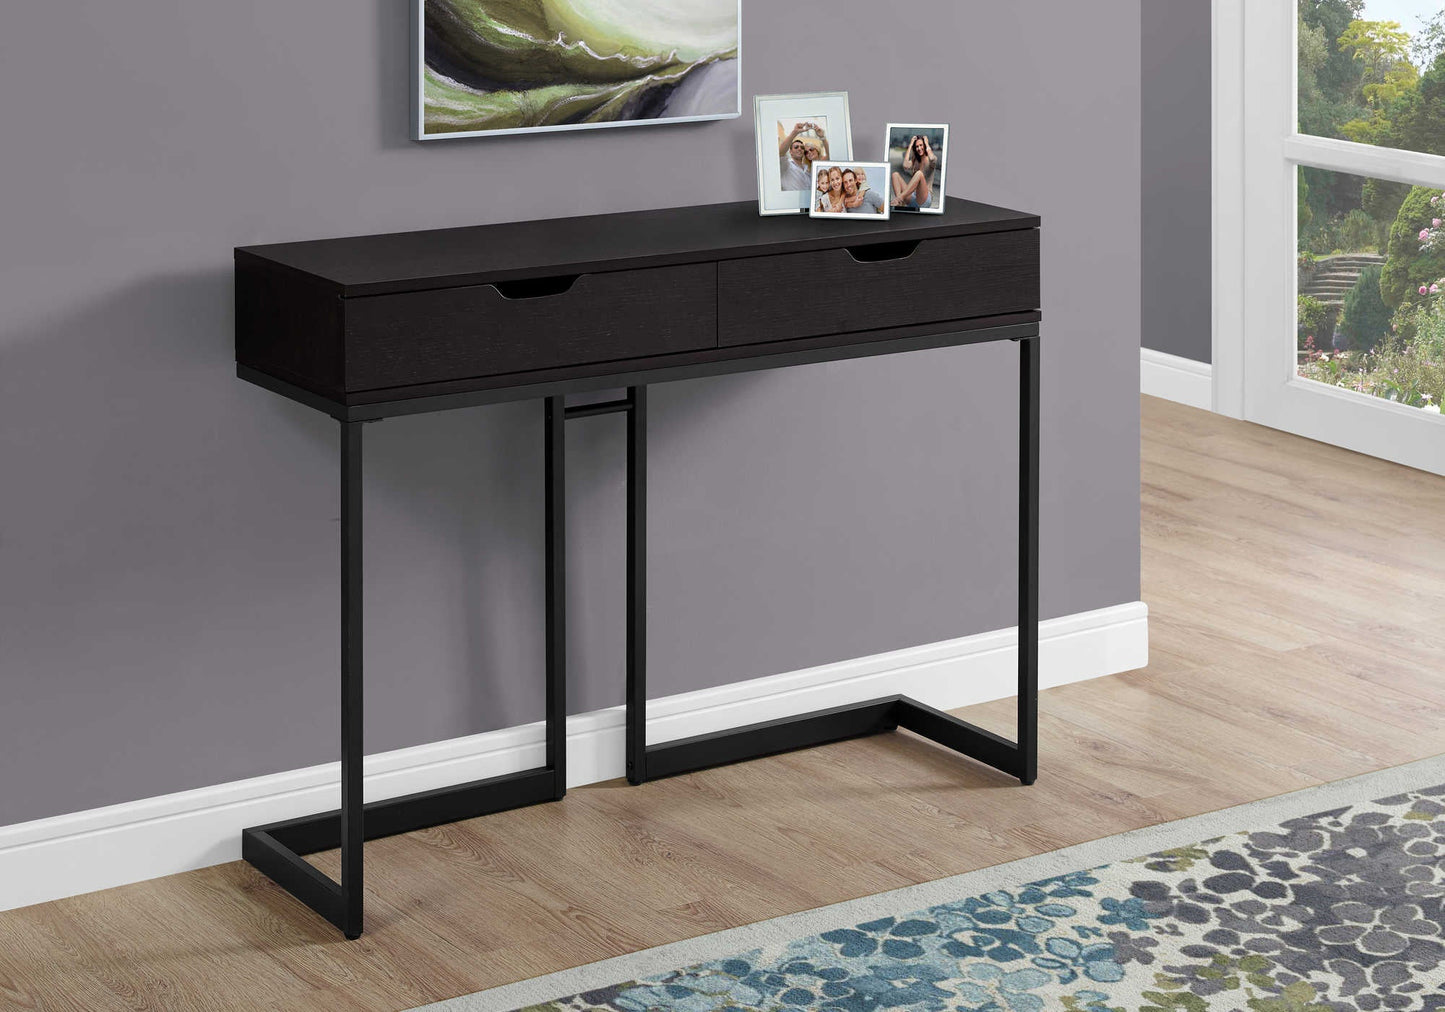 42"L Metal Frame Wood Tabletop Bedroom Accent Hall Console Table